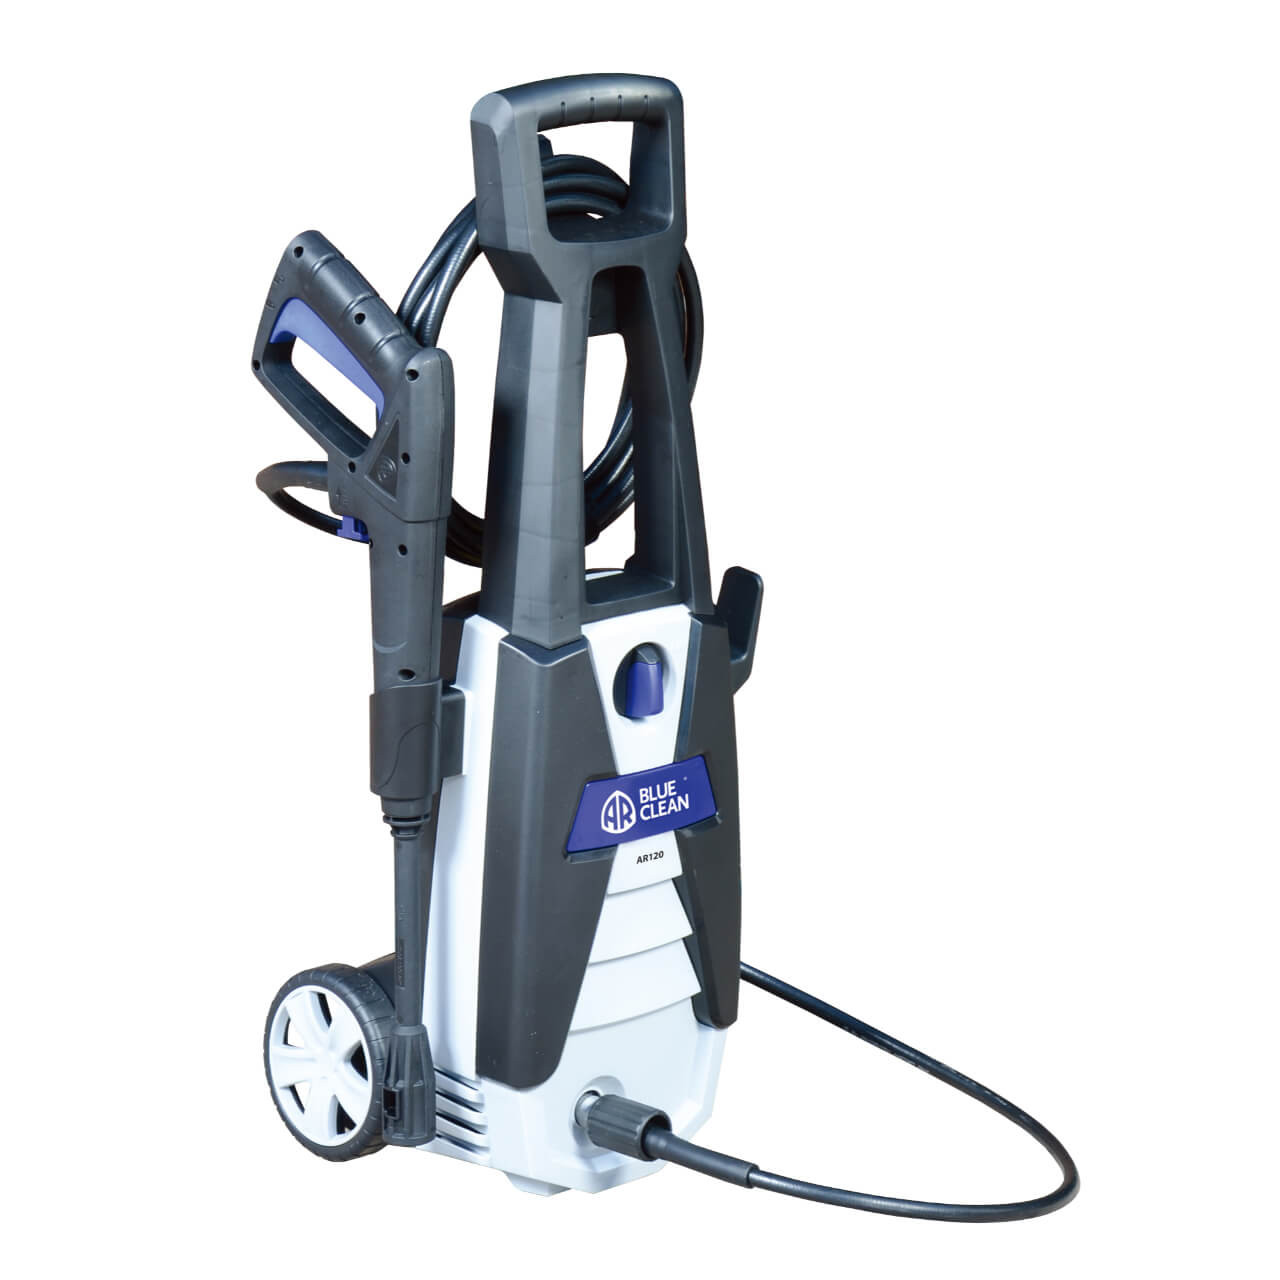 SP Tools 1400W AR 1740PSI Electric Pressure Washer